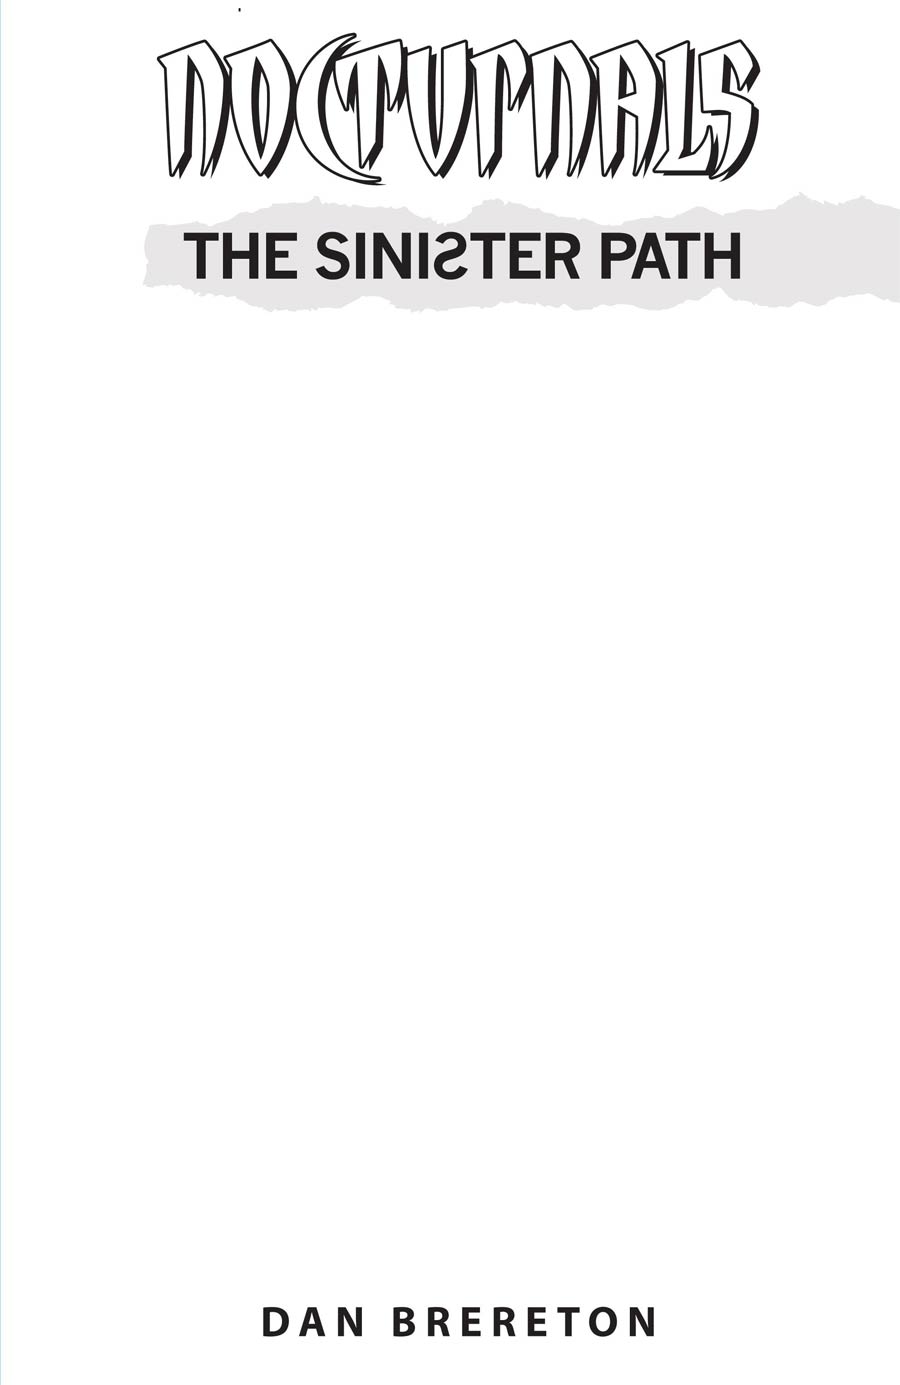 Nocturnals Sinister Path GN Variant Blank Cover